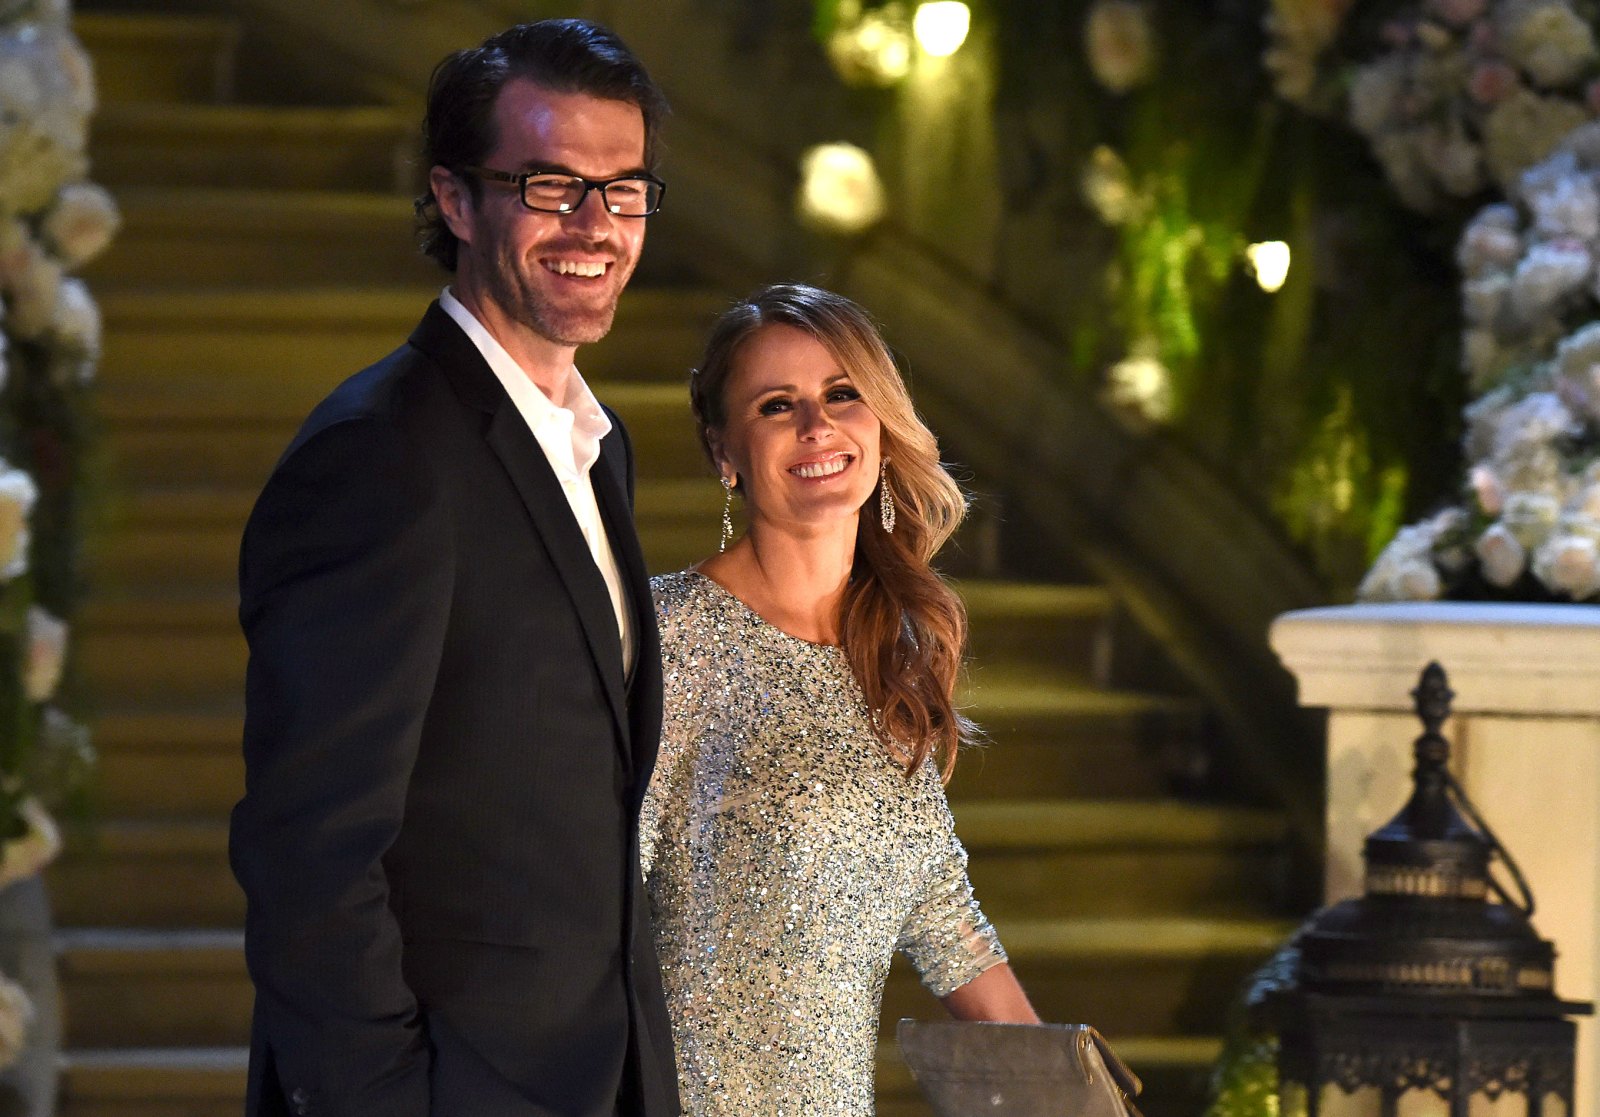 Trista Ryan Sutter On Their Relationship 15 Years After Bachelorette